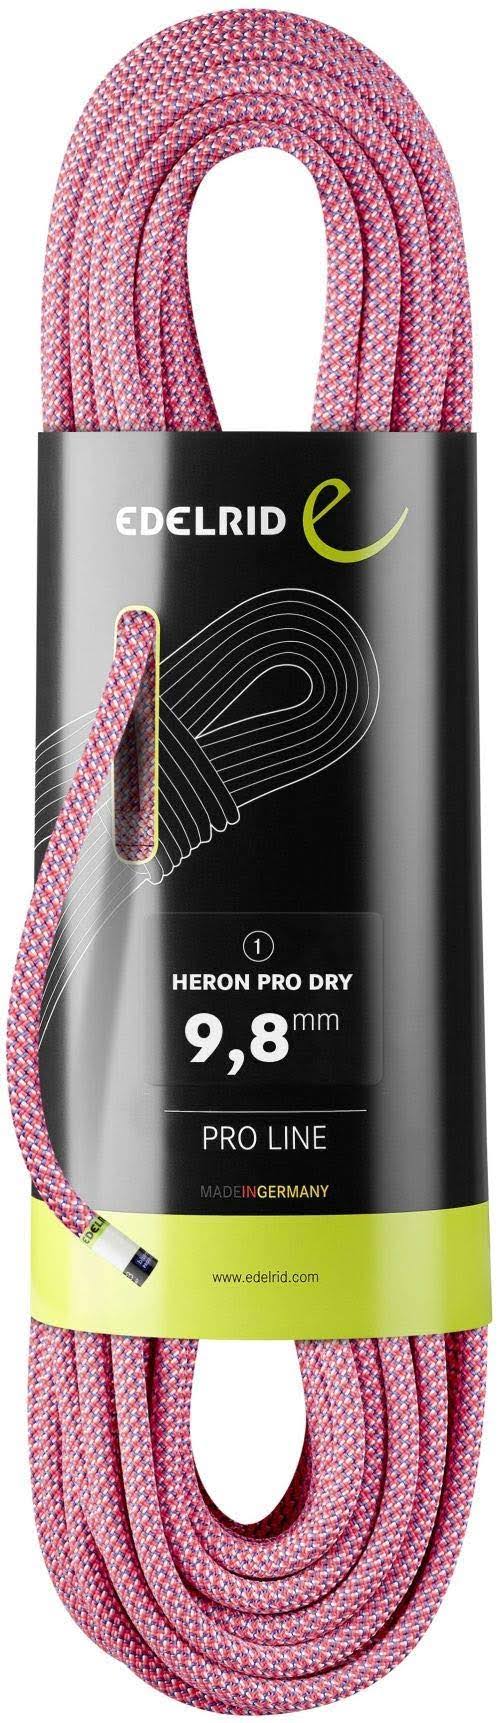 Edelrid Boa Pro Dry Climbing Rope - 9.8mm Pink/Turquoise, 70M